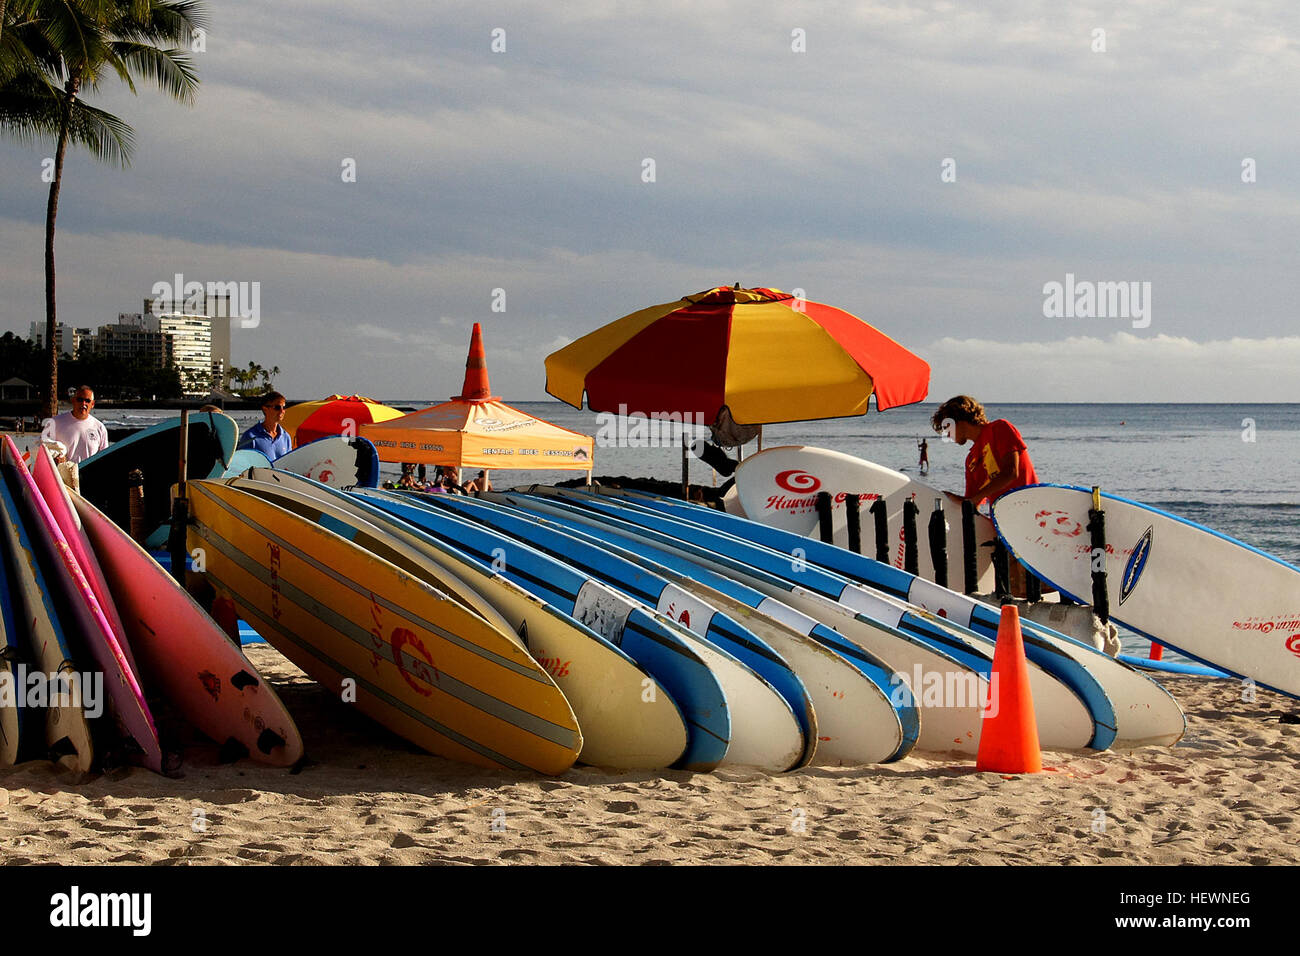 So, there are a lot of options on surfboard rentals on Waikiki beach. Lots of spots right on the beach actually, so why would you go anywhere else. Stock Photo